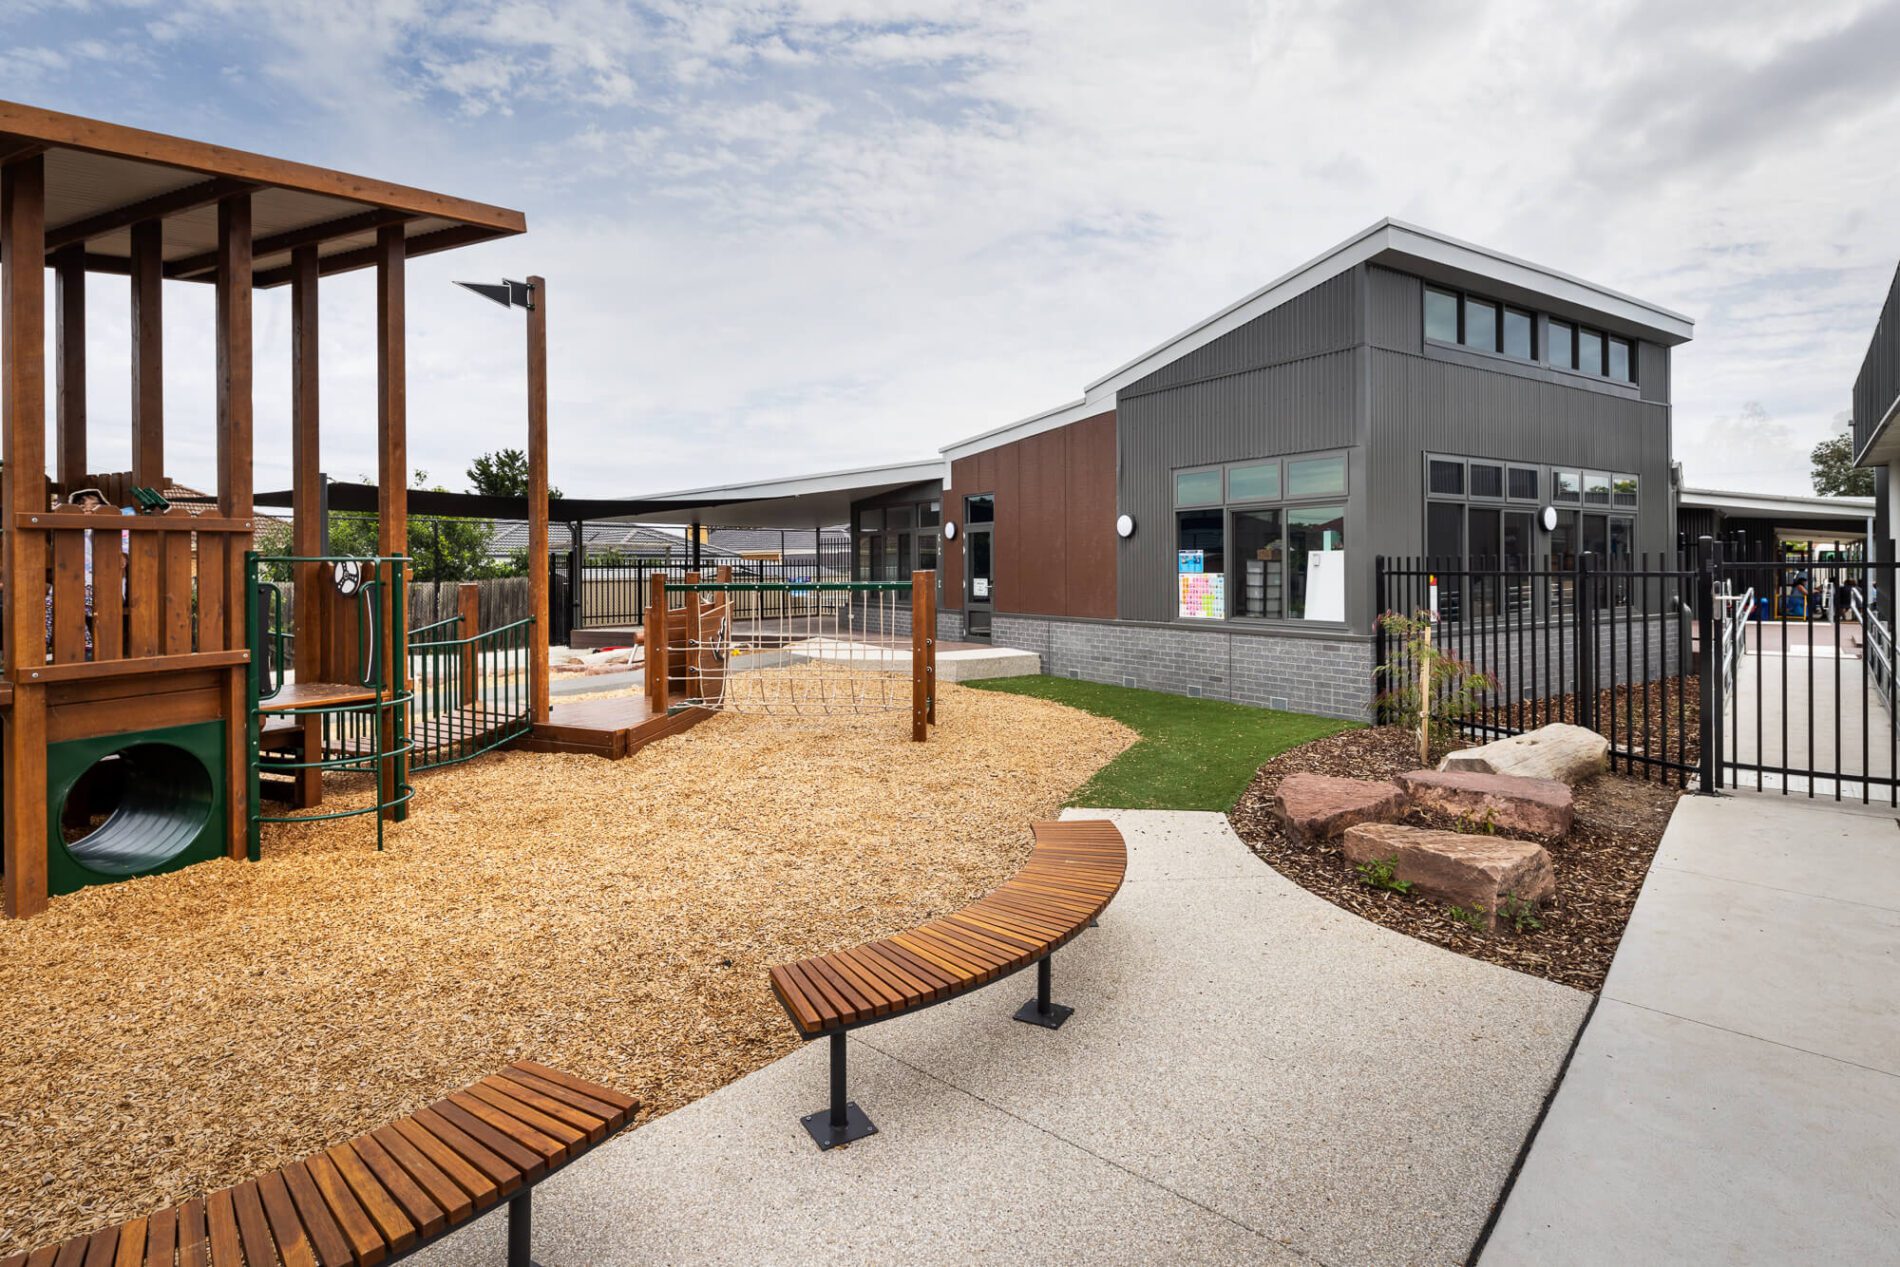 Outdoor play gym on soft fall bark, curved timber seating and classroom in background